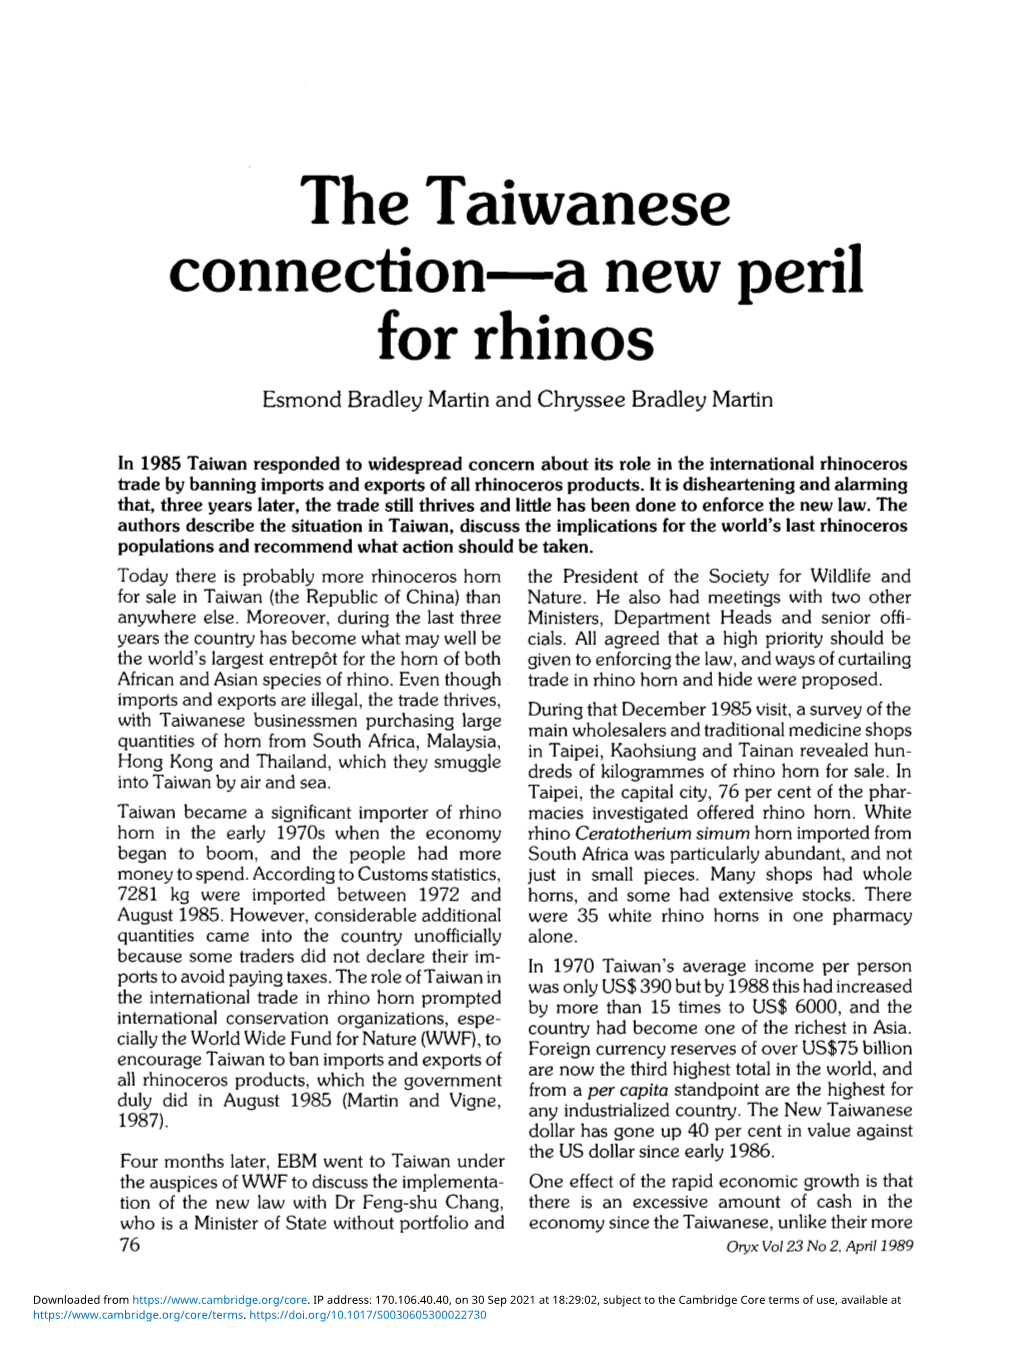 The Taiwanese Connection—A New Peril for Rhinos Esmond Bradley Martin and Chryssee Bradley Martin